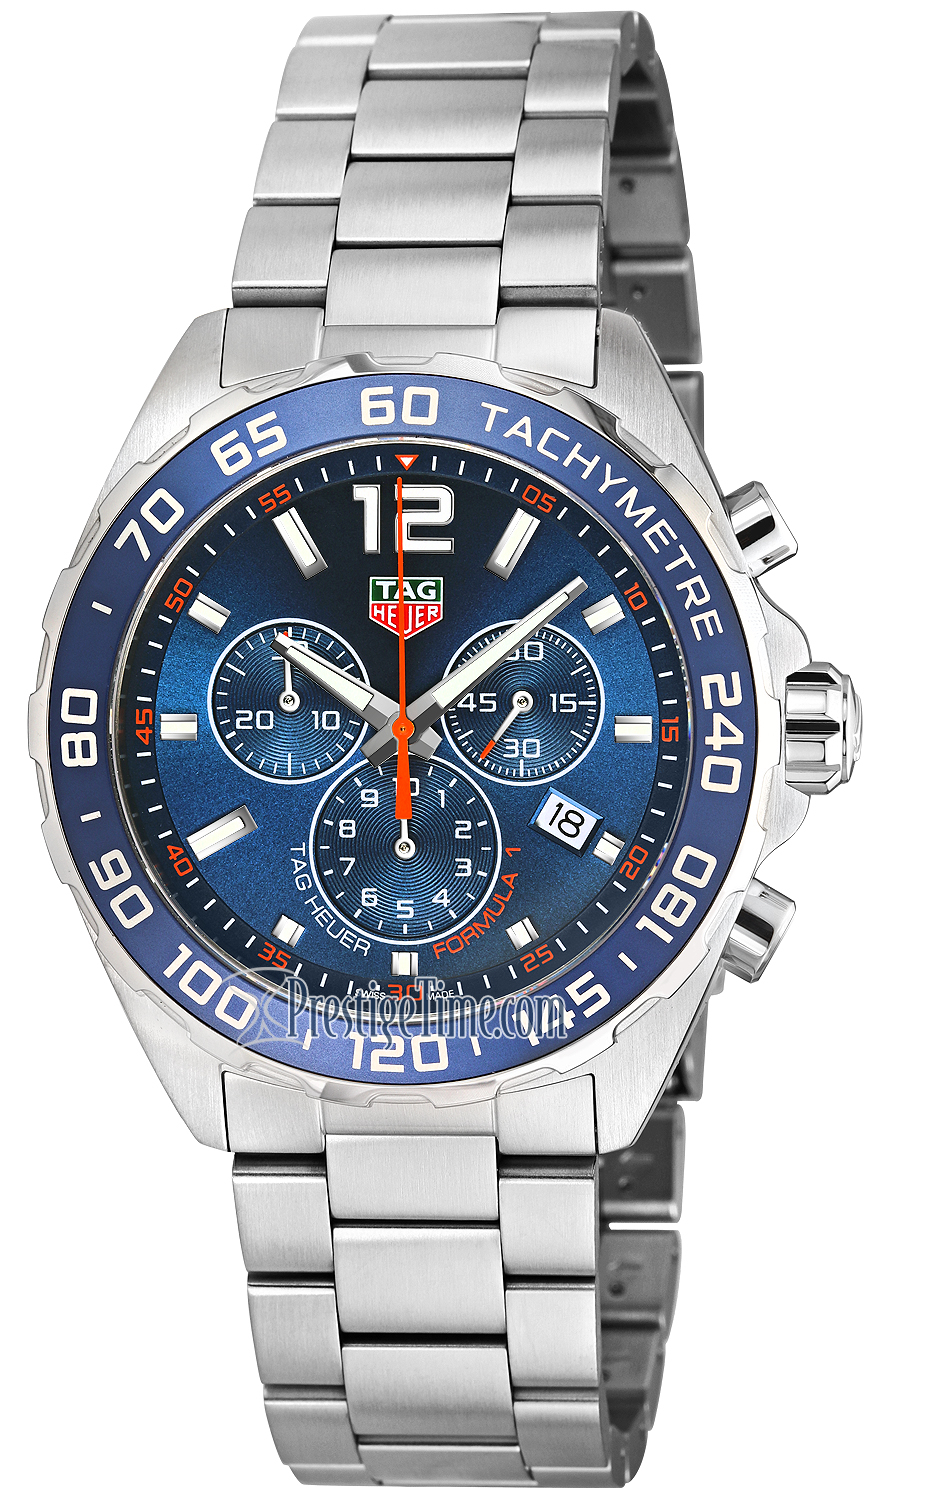  Tag Heuer Formula 1 Chronograph 43mm Mens Ref CAZ1014.BA0842 :  Clothing, Shoes & Jewelry